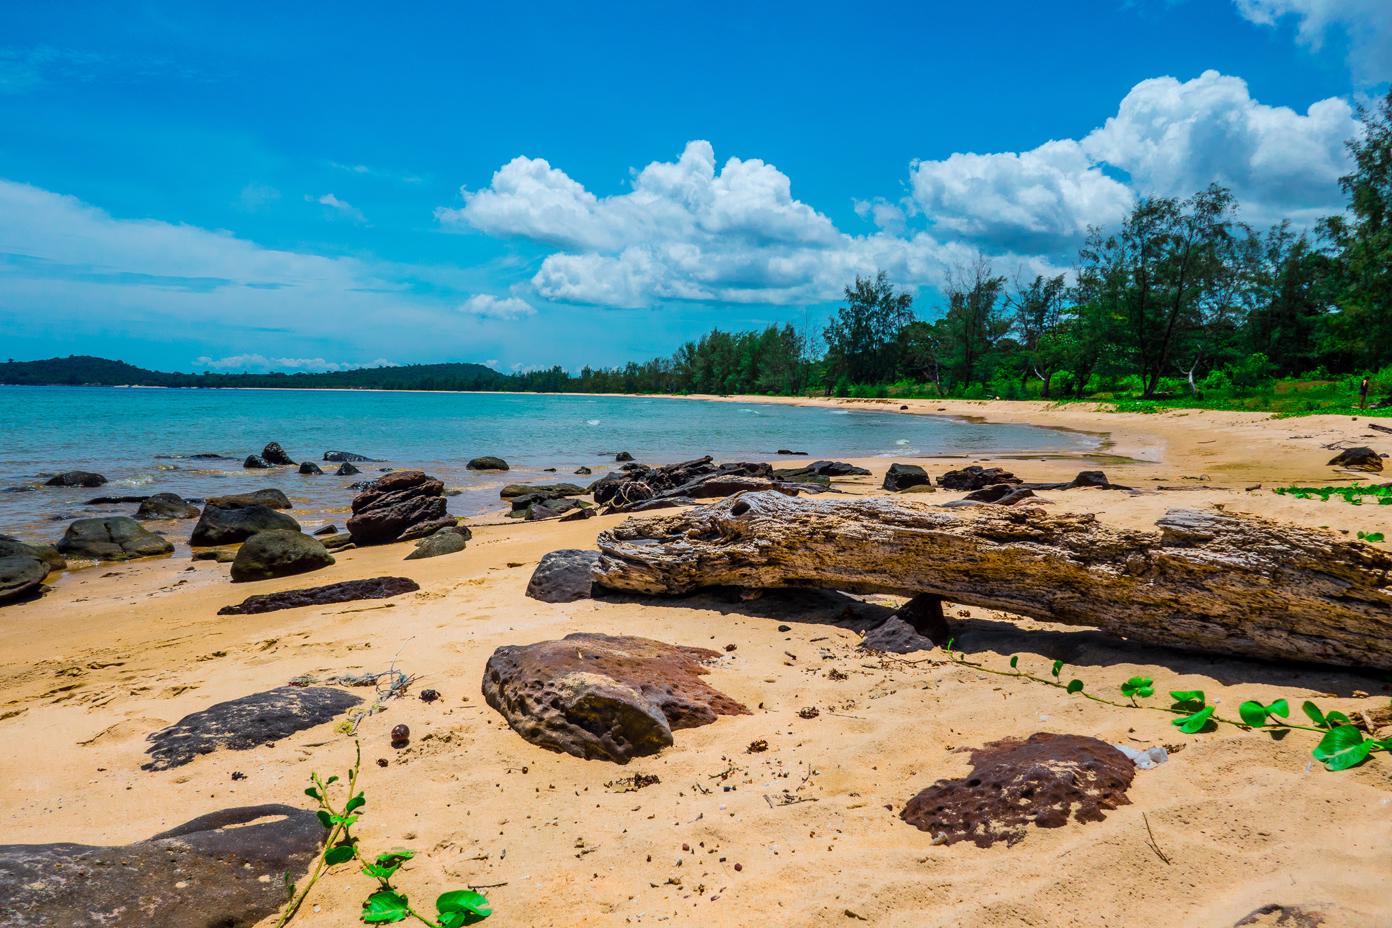 Phu Quoc Travel Guide - Plan the perfect adventure